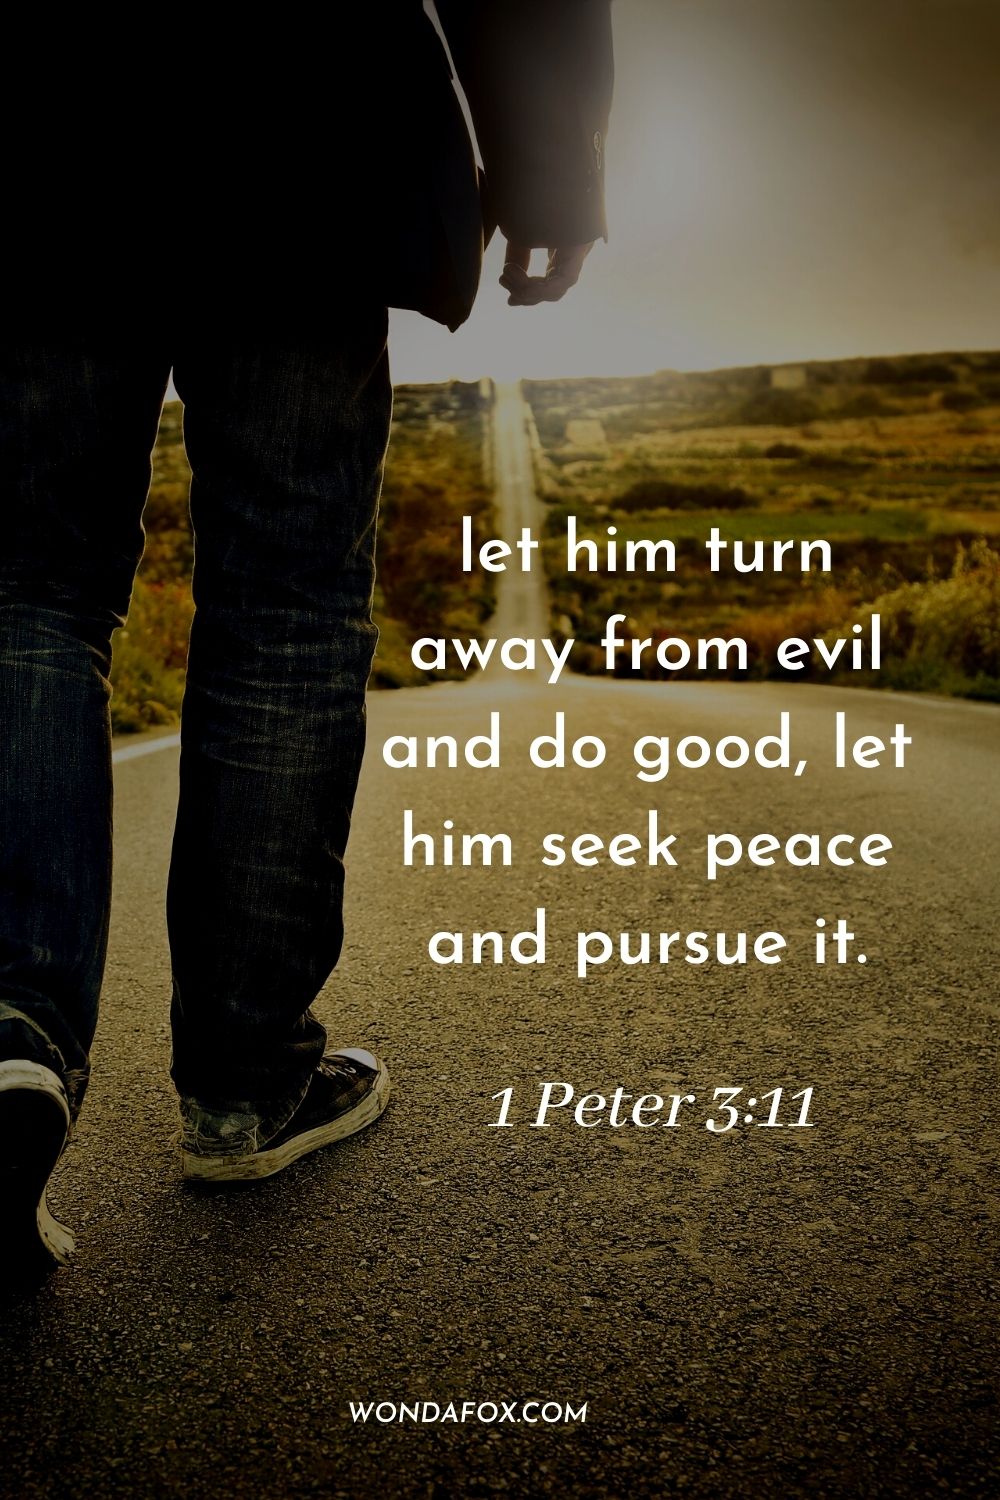 let him turn away from evil and do good, let him seek peace and pursue it. 1 Peter 3:11